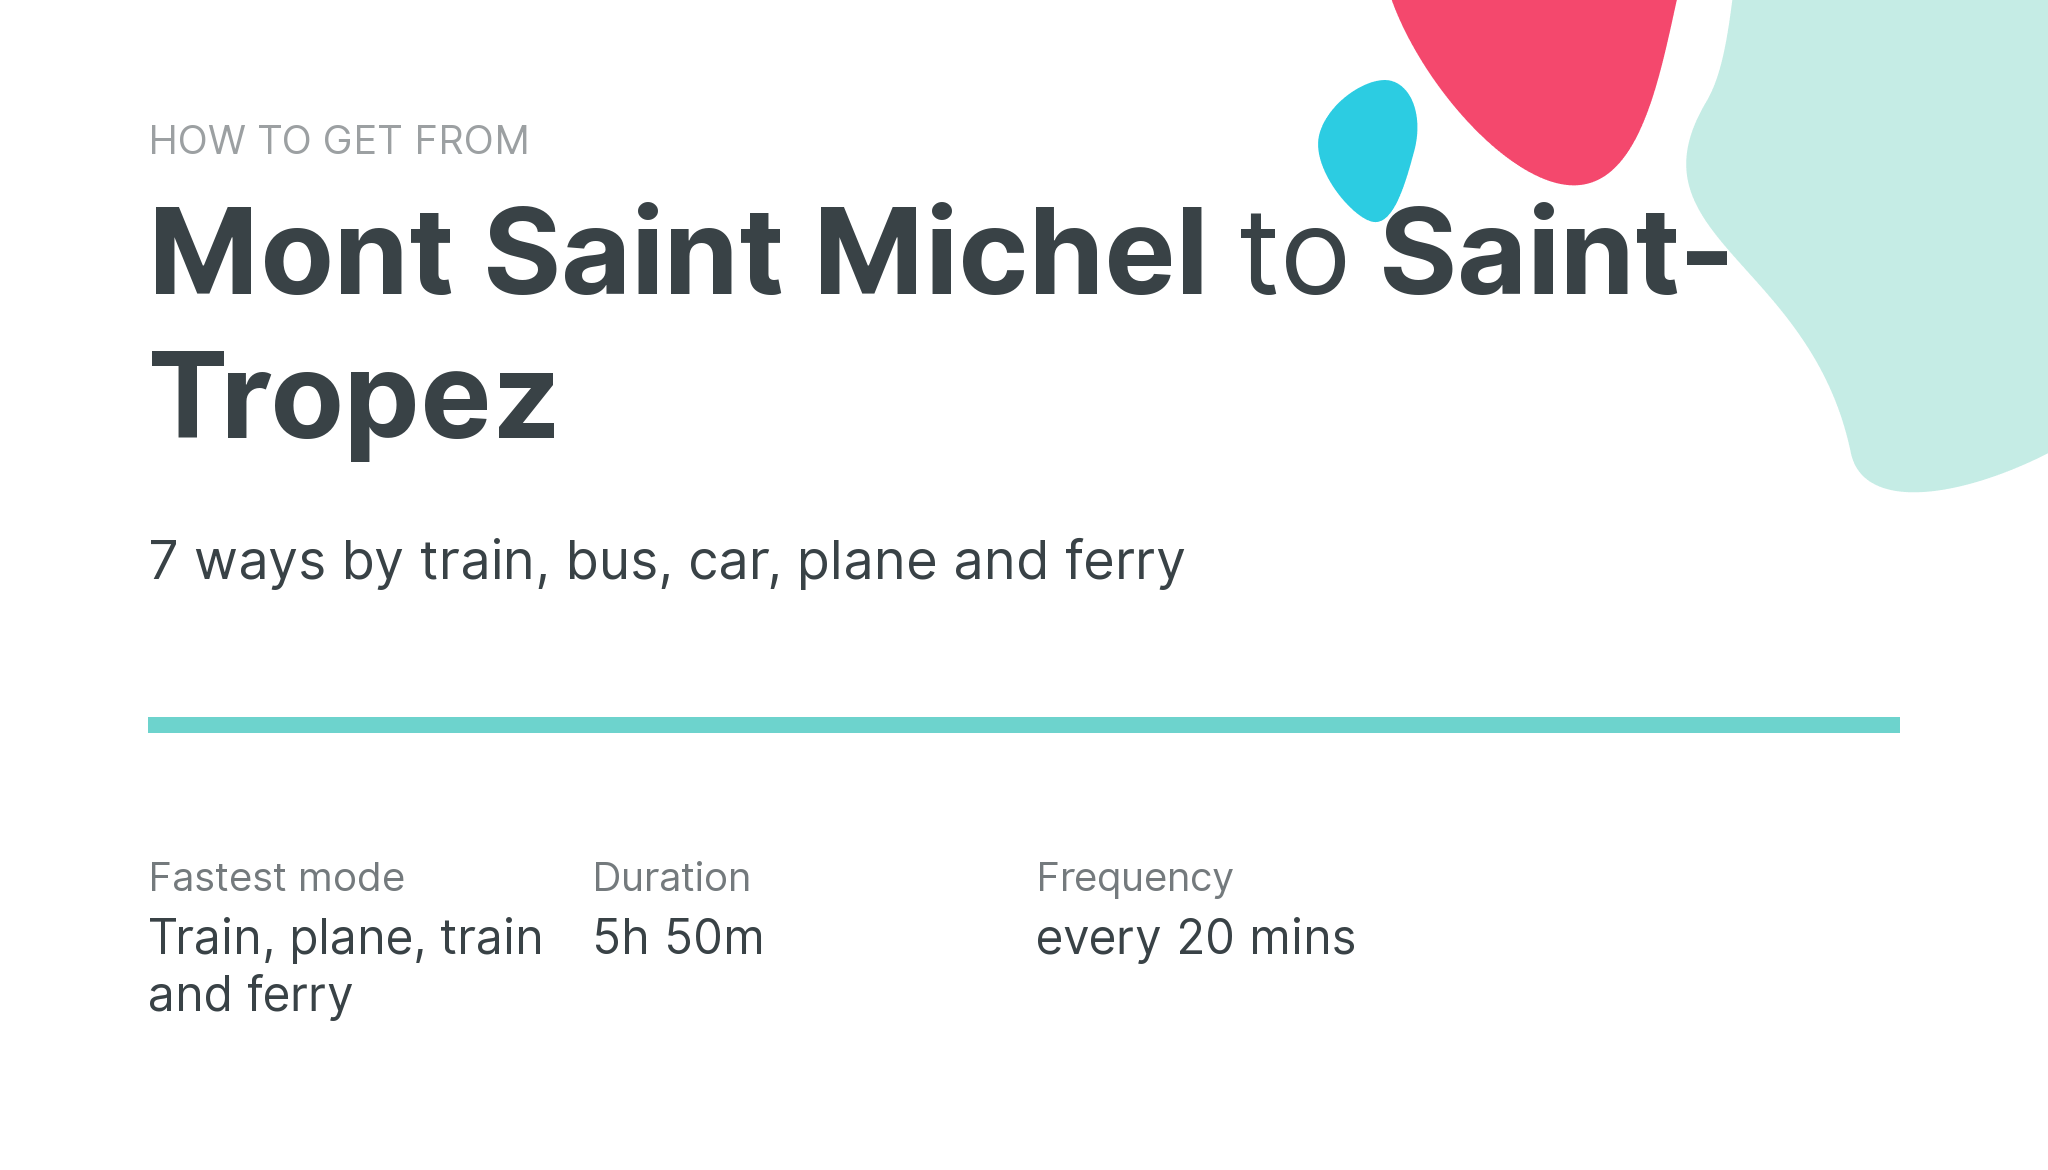 How do I get from Mont Saint Michel to Saint-Tropez